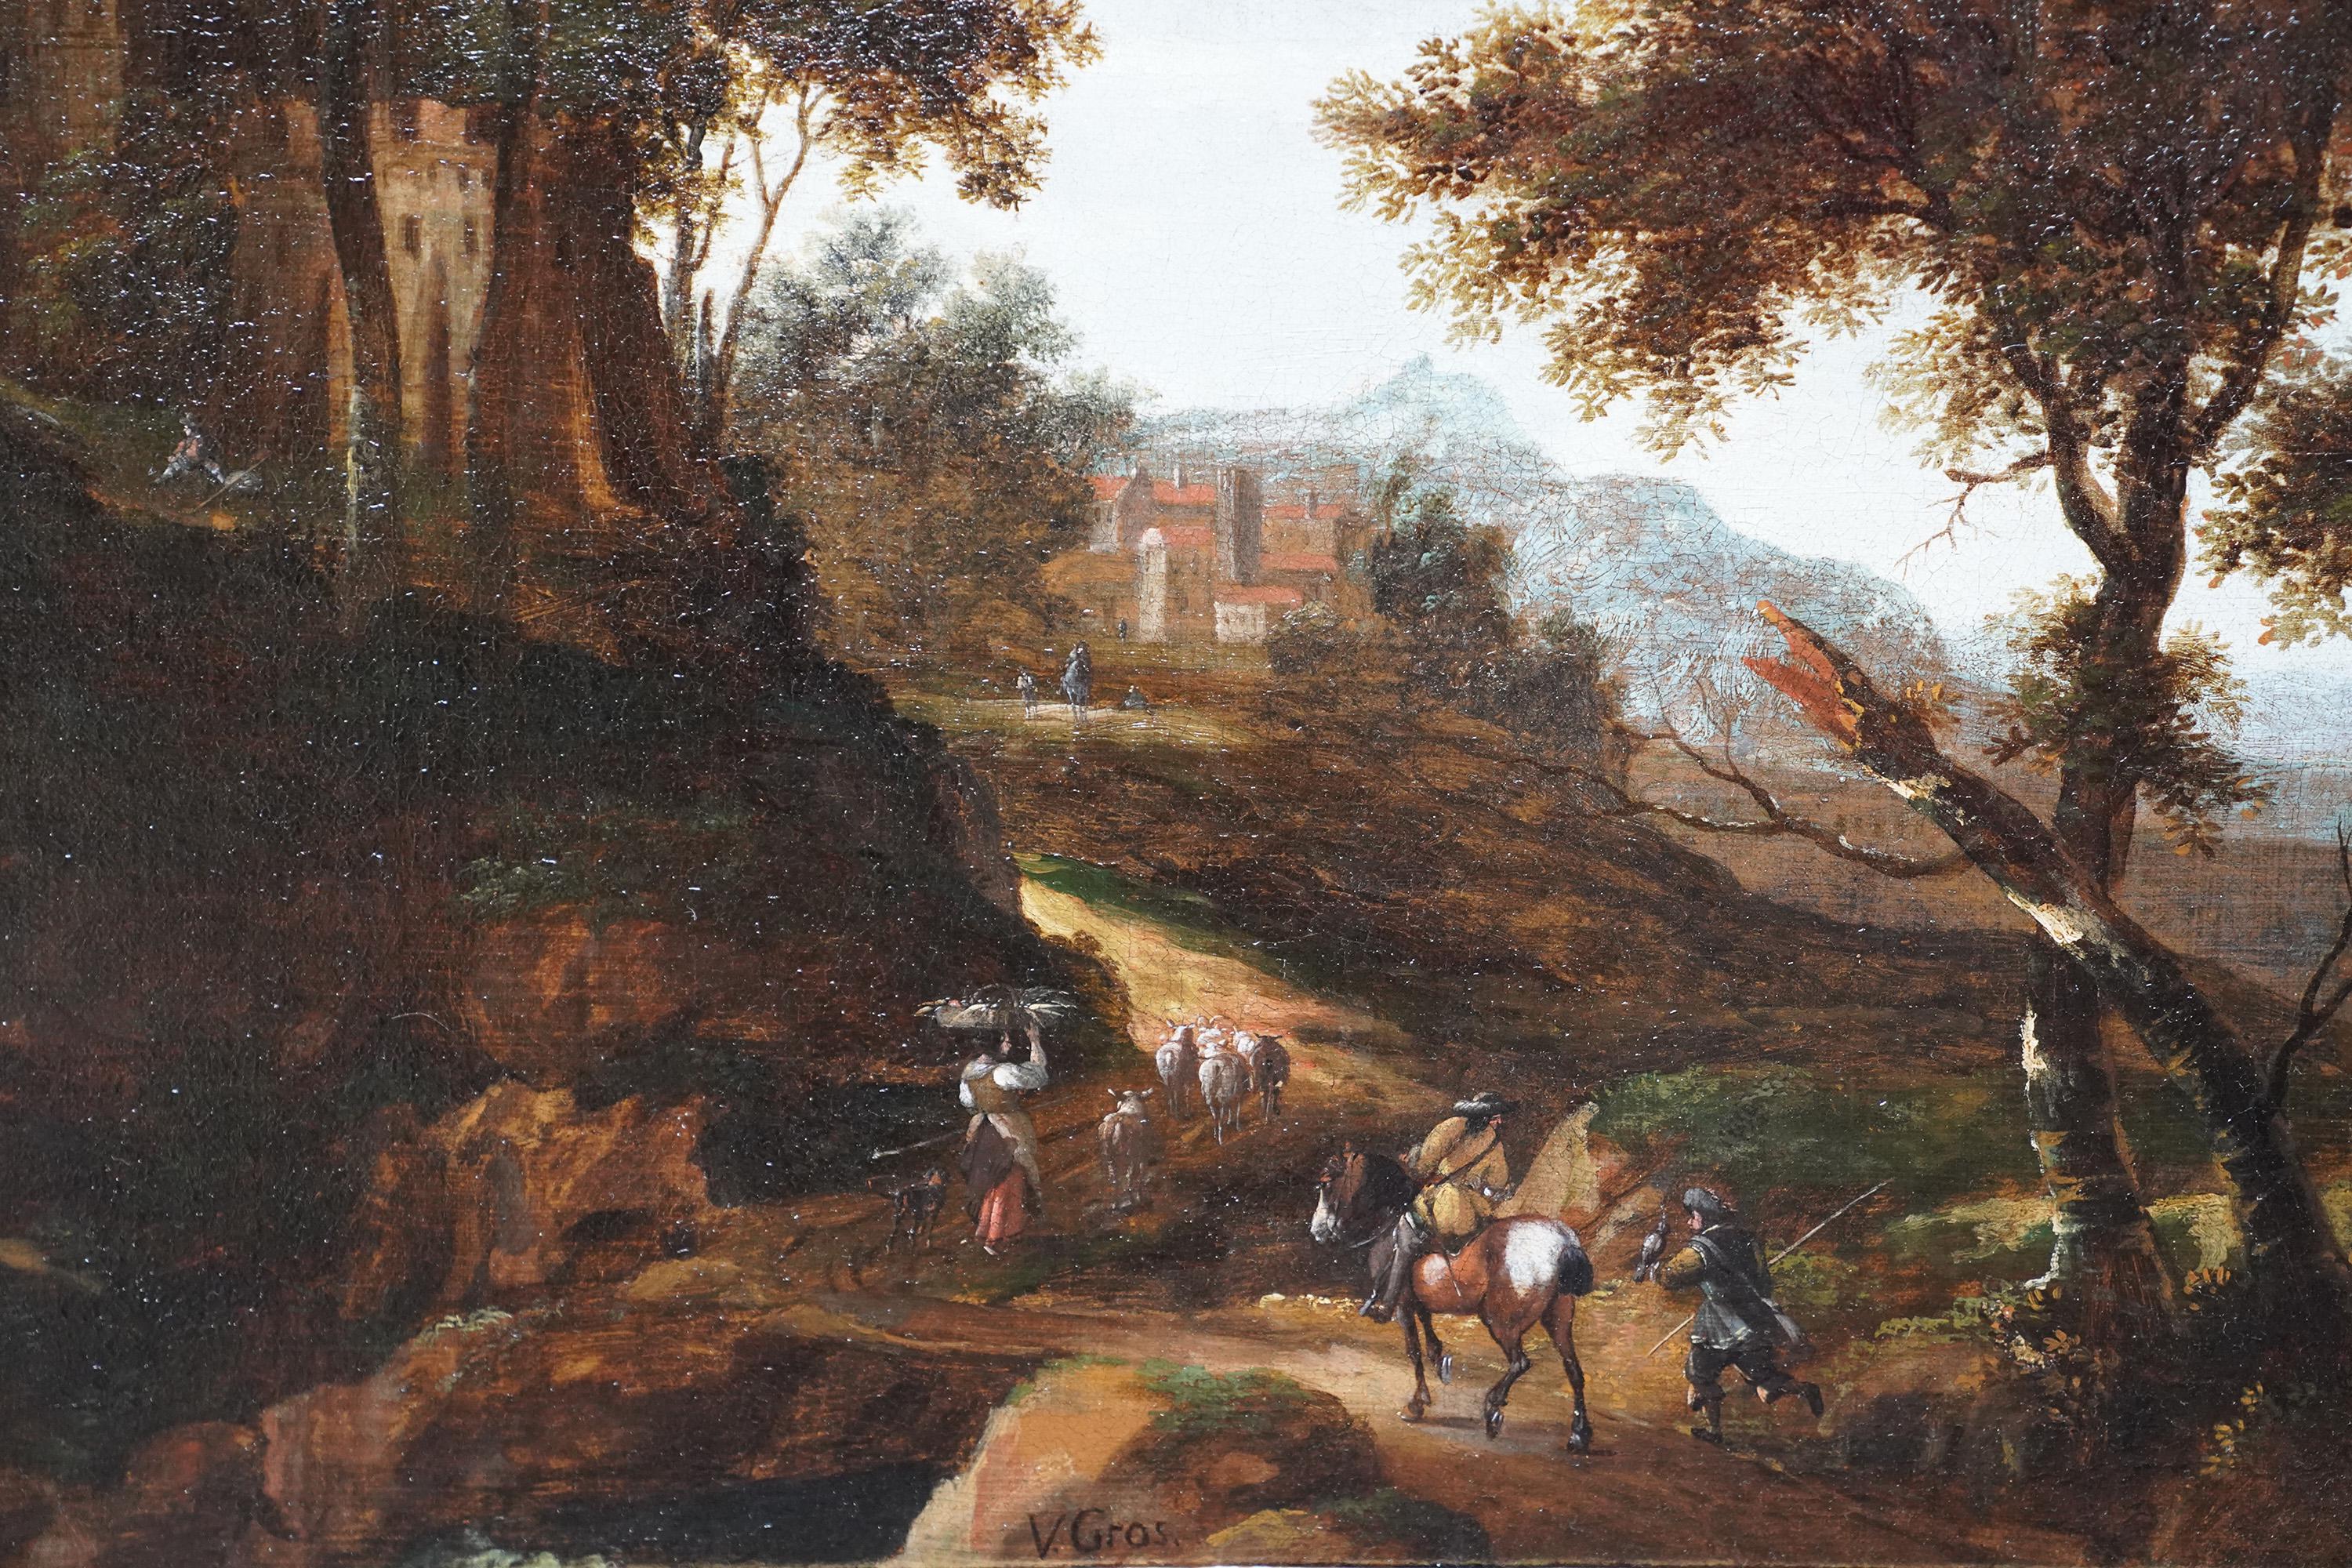 This superb Dutch Golden Age Old Master landscape oil painting is attributed to Jacob van der Croos. Painted circa 1670 it is an Italianate landscape with figures and their animals in the foreground travelling a road through imposing trees to a